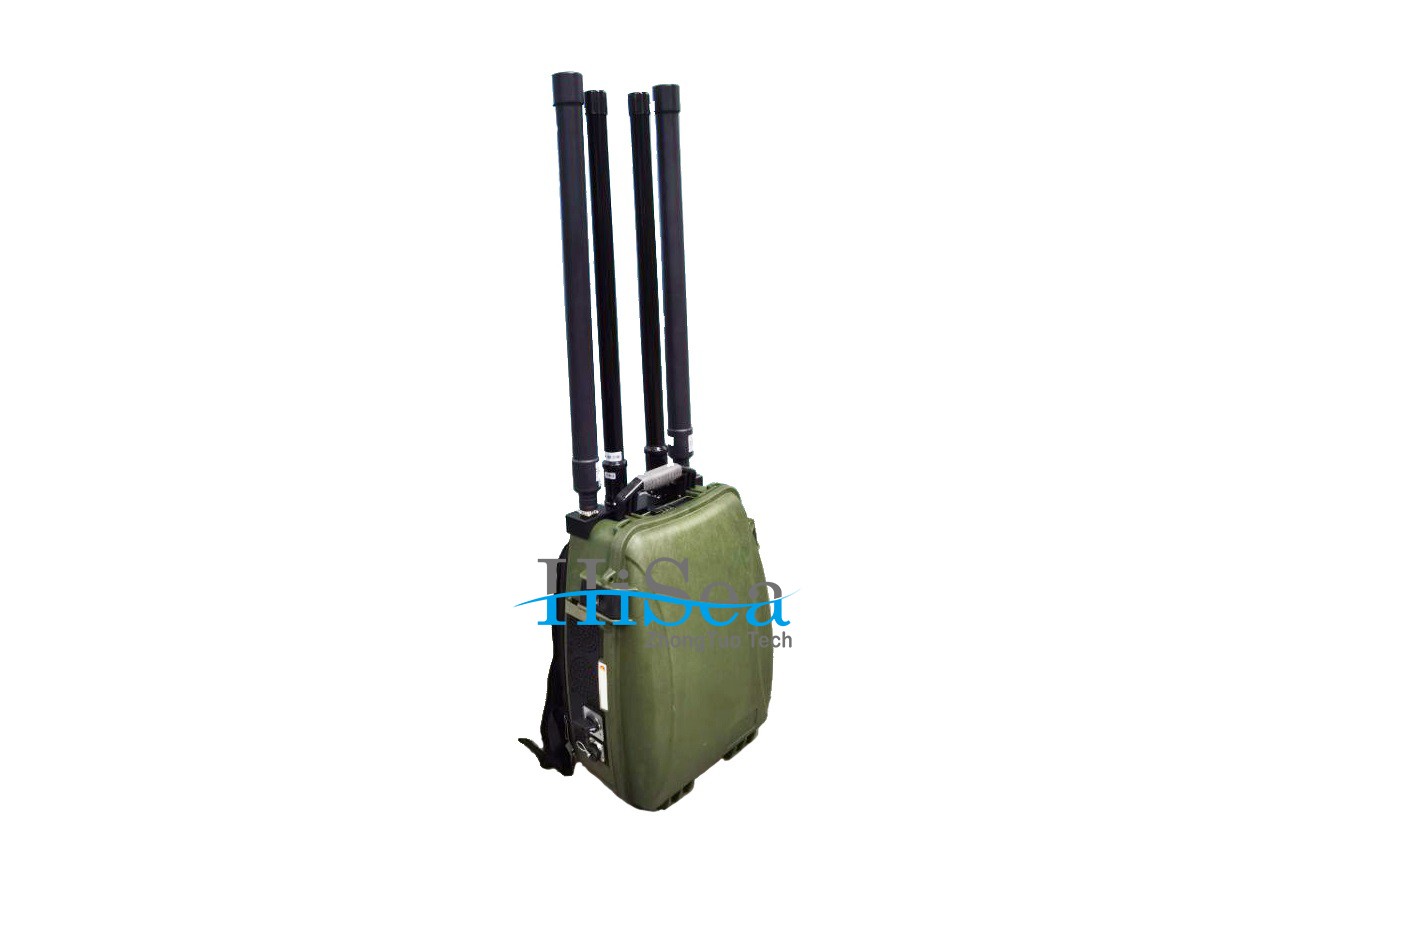 understood of purchasing mobile phone signal jammers